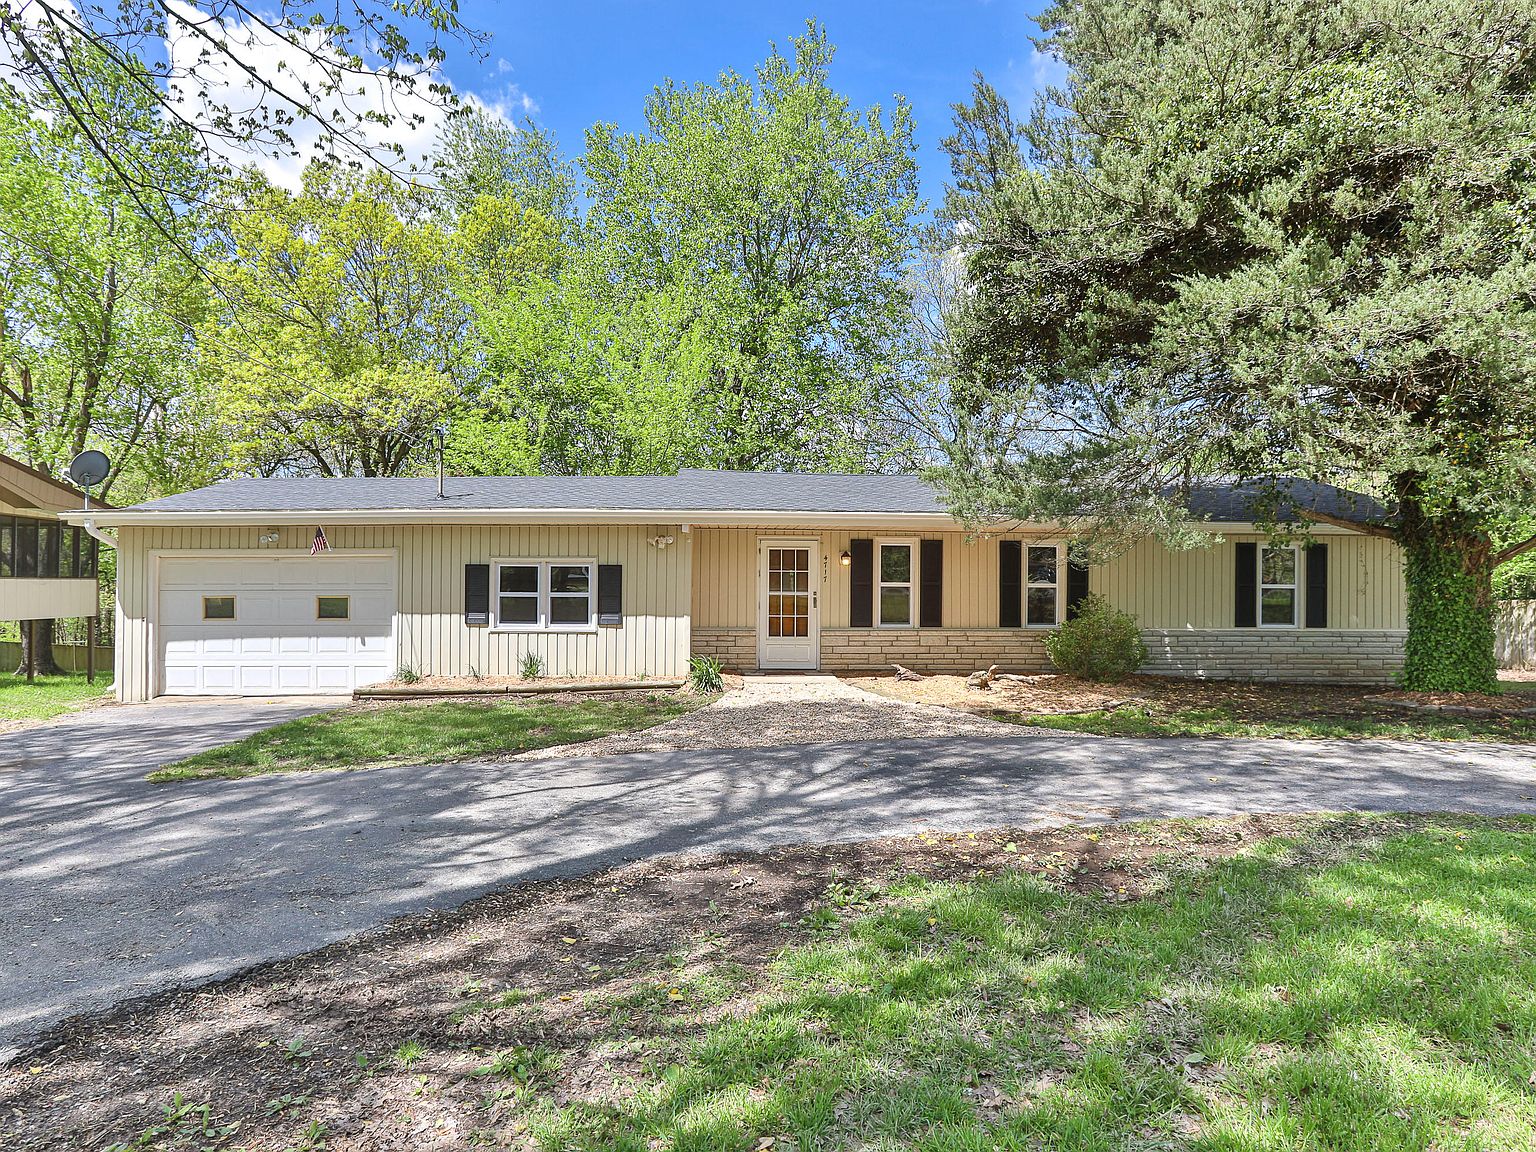 4717 S Roslyn Ave, Springfield, MO 65804 | Zillow